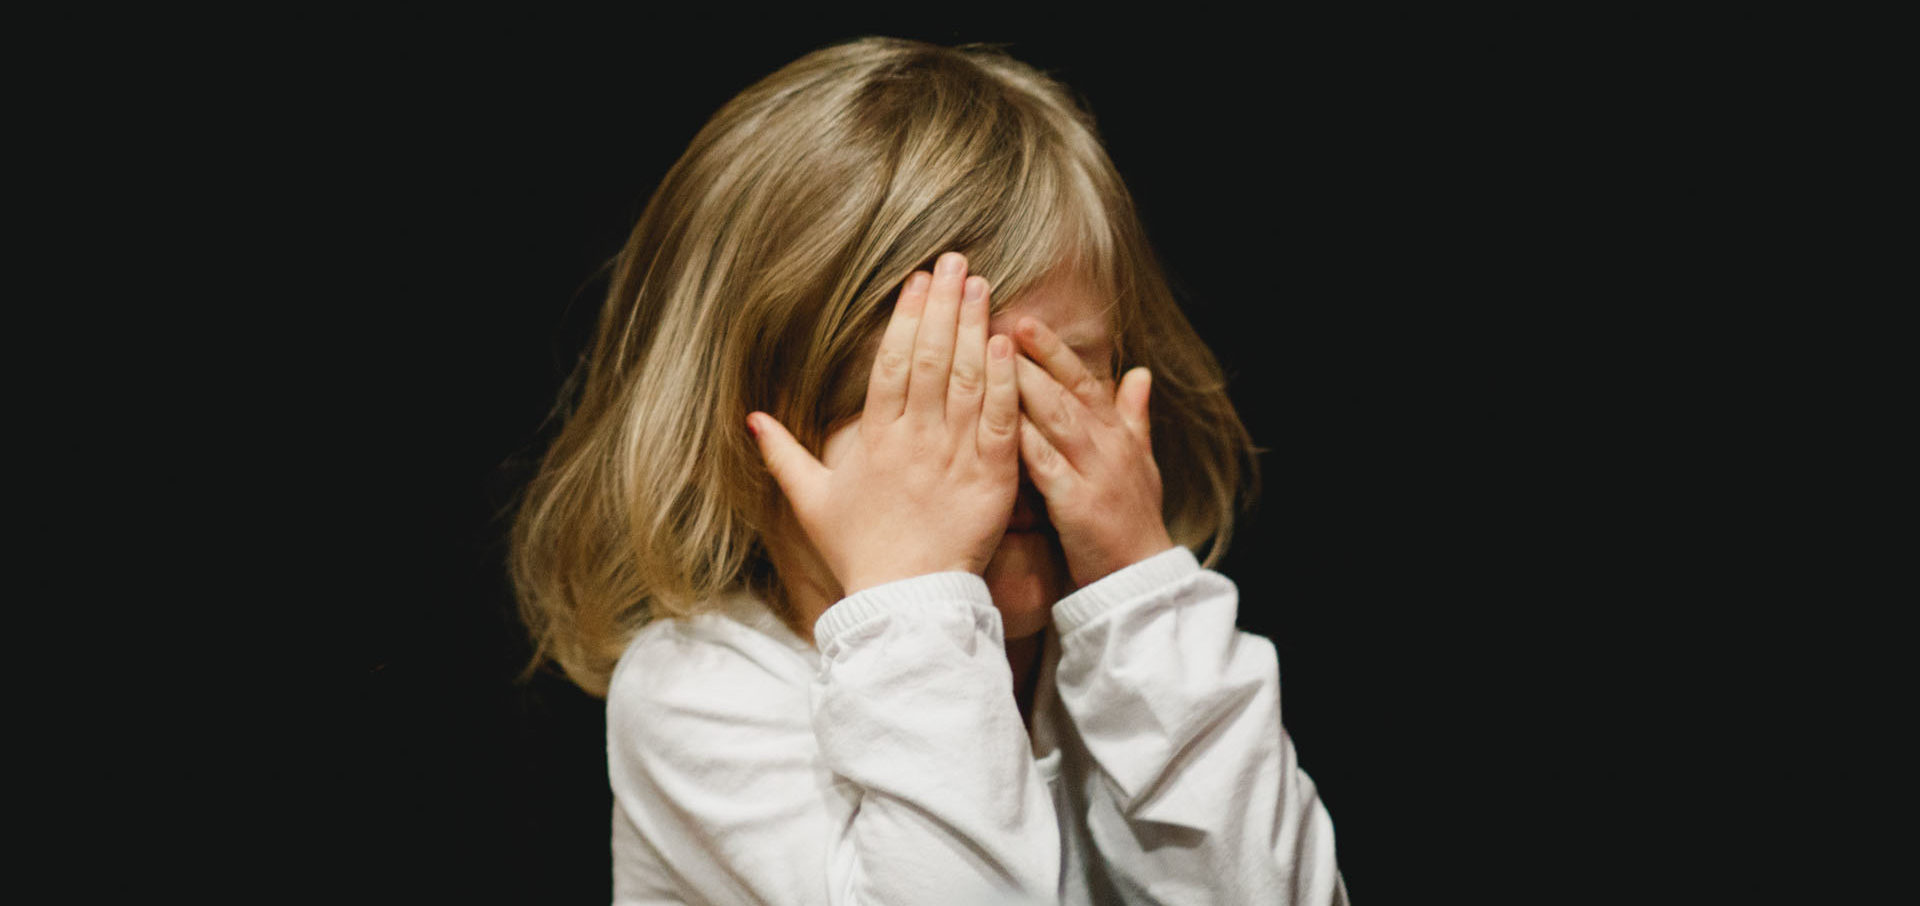 Got A Shy Child? Here’s How To Help - Parents Canada